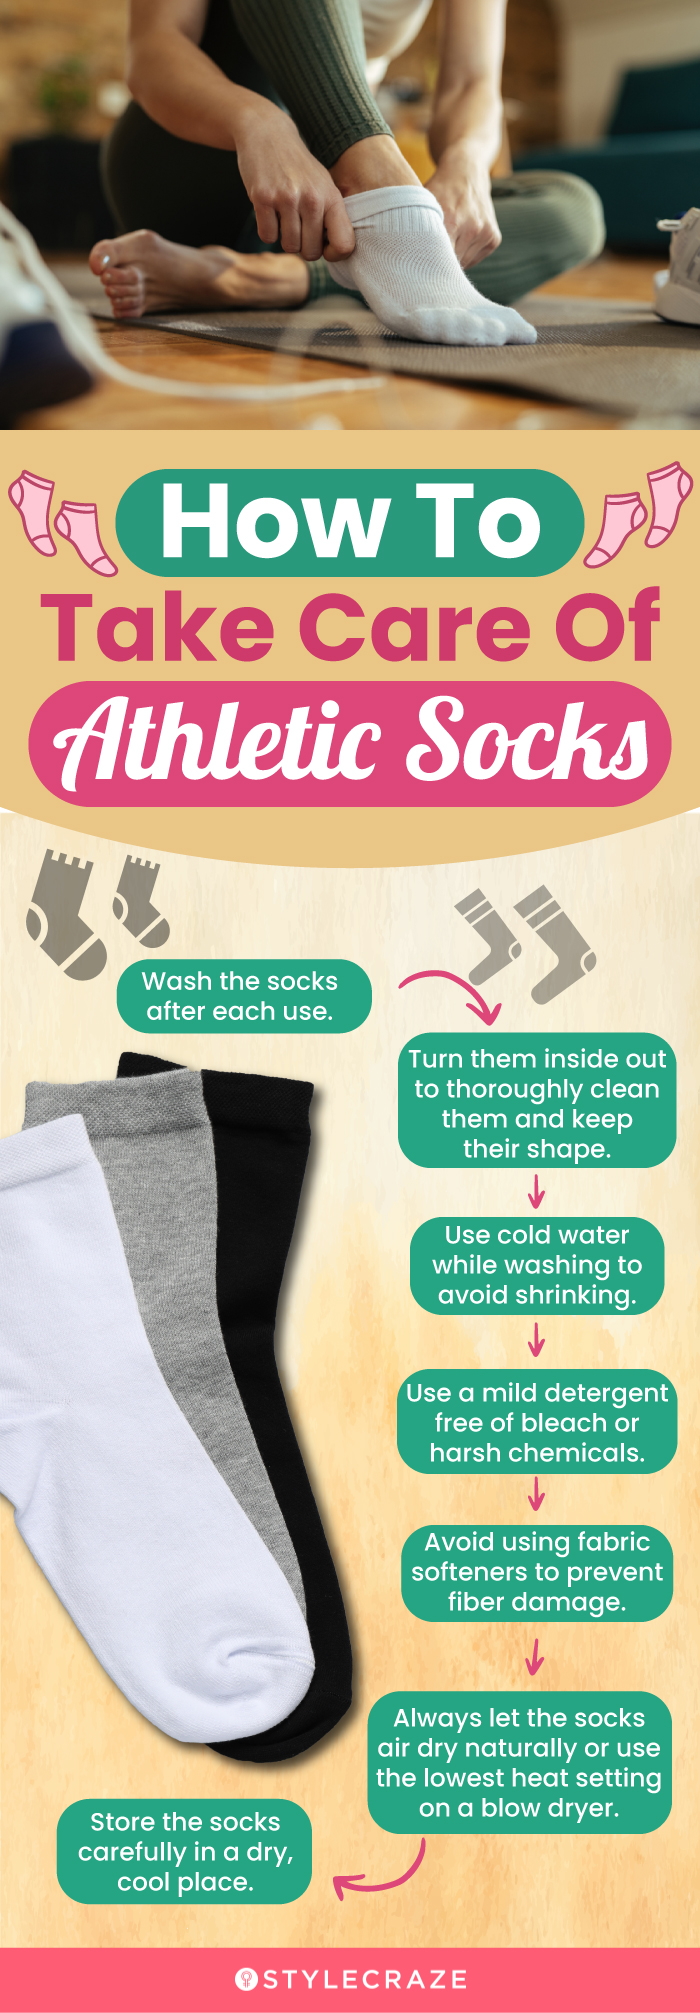 How To Take Care Of Athletic Socks (infographic)